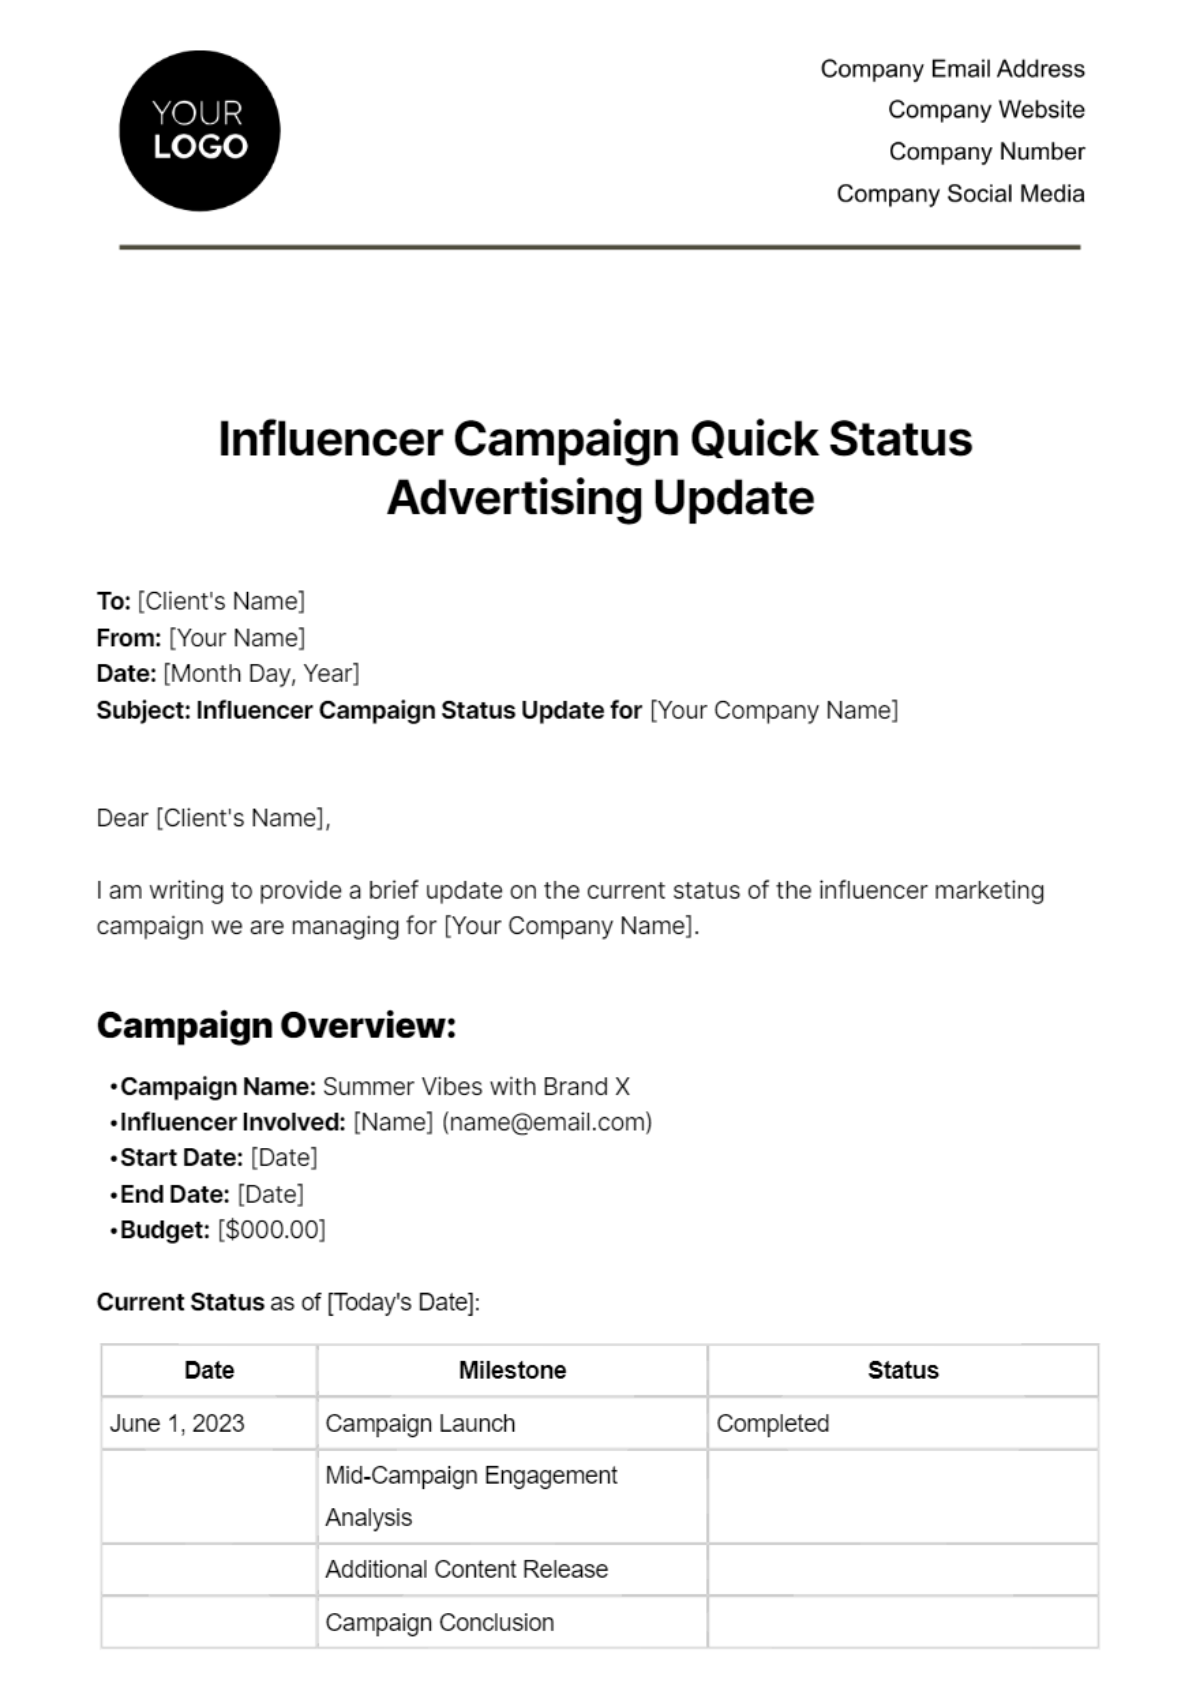 Influencer Campaign Quick Status Advertising Update Template